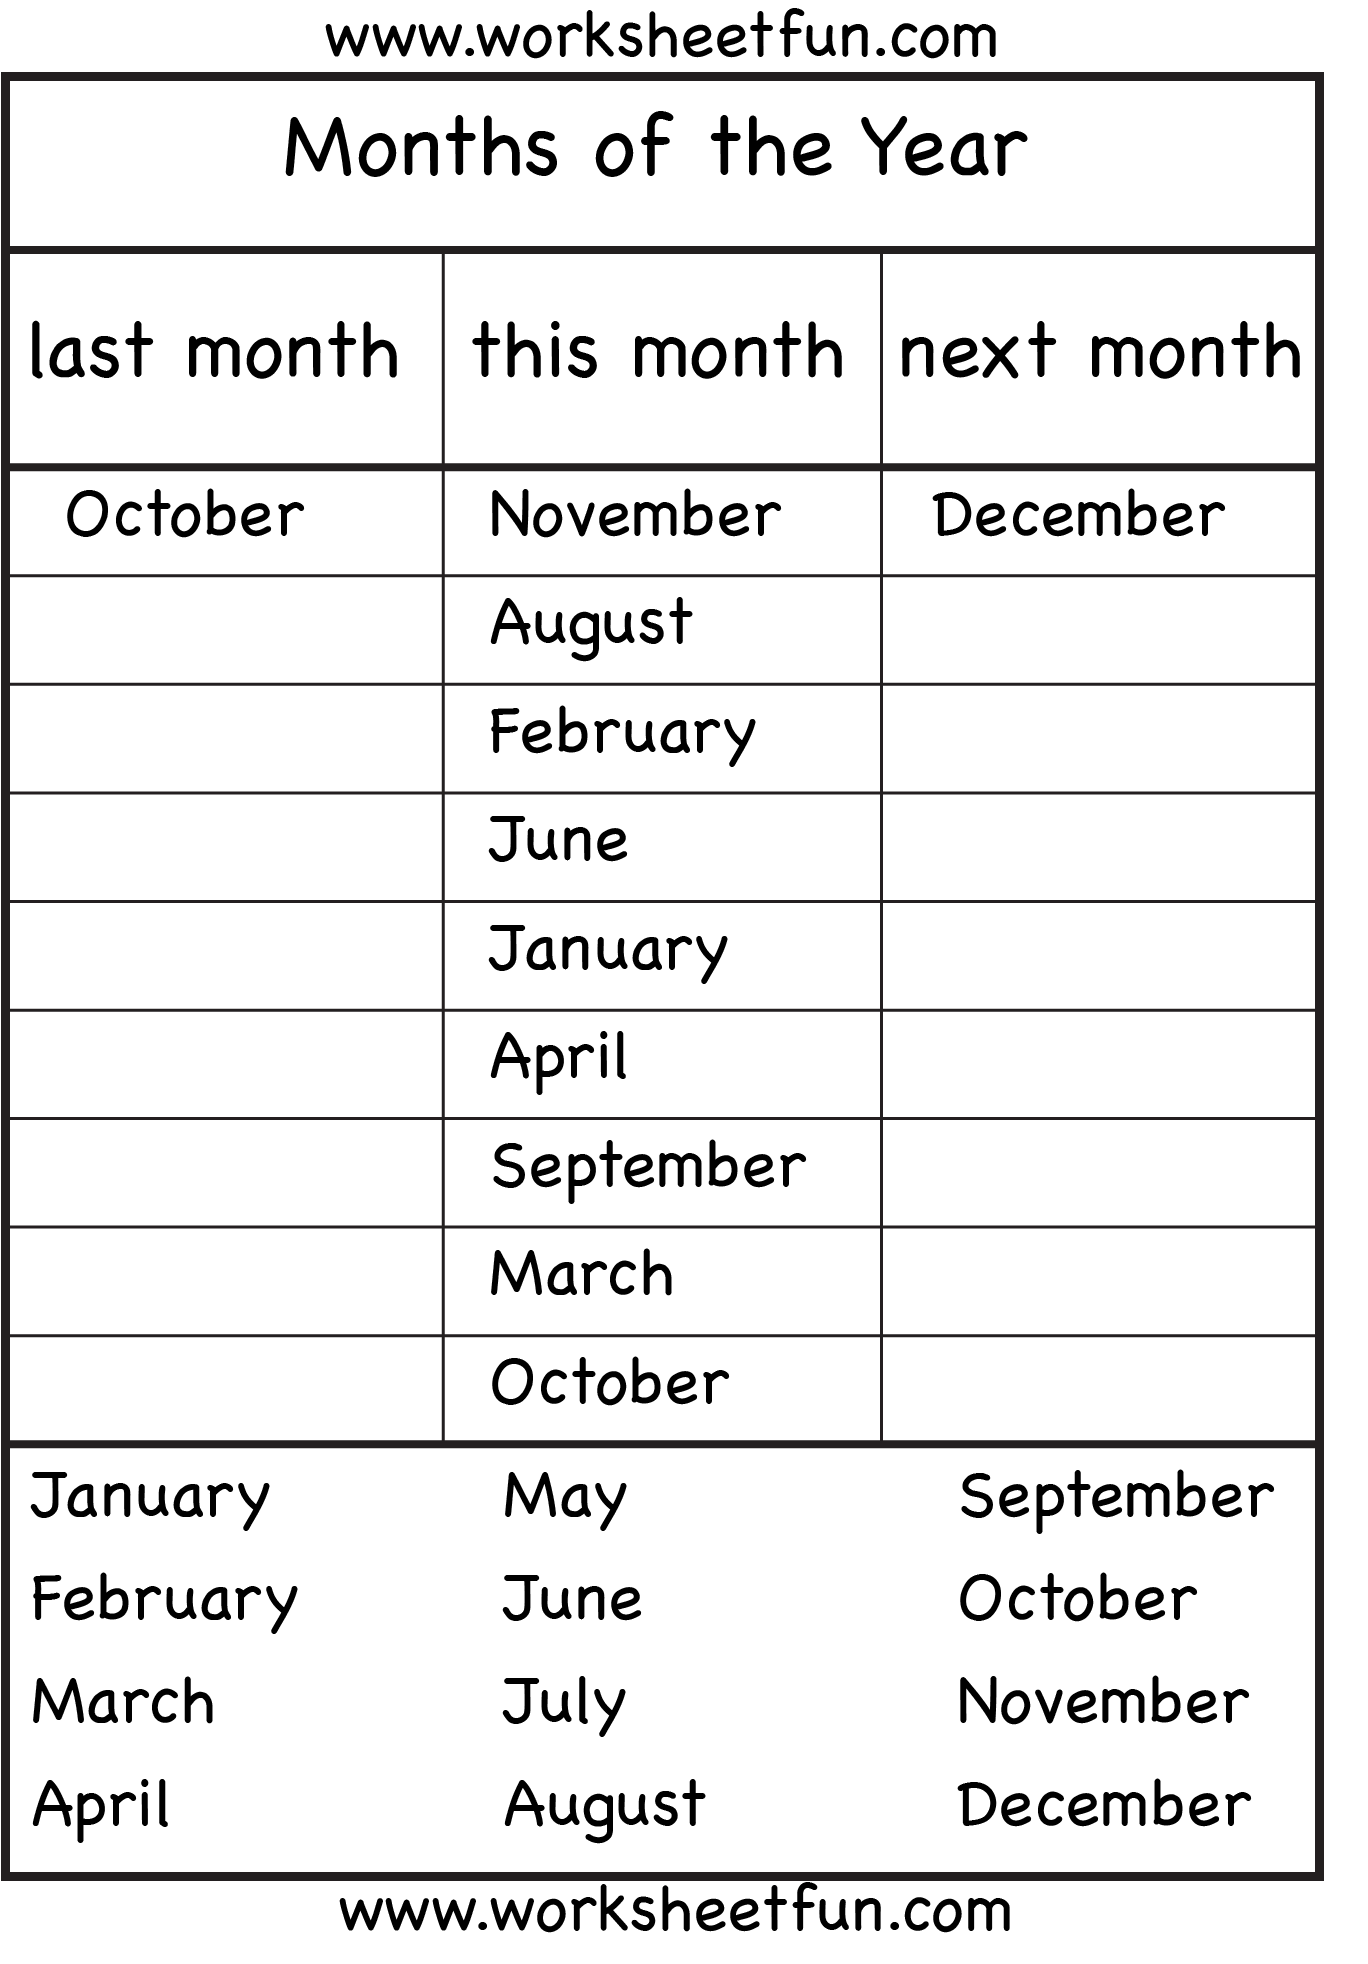 months-and-seasons